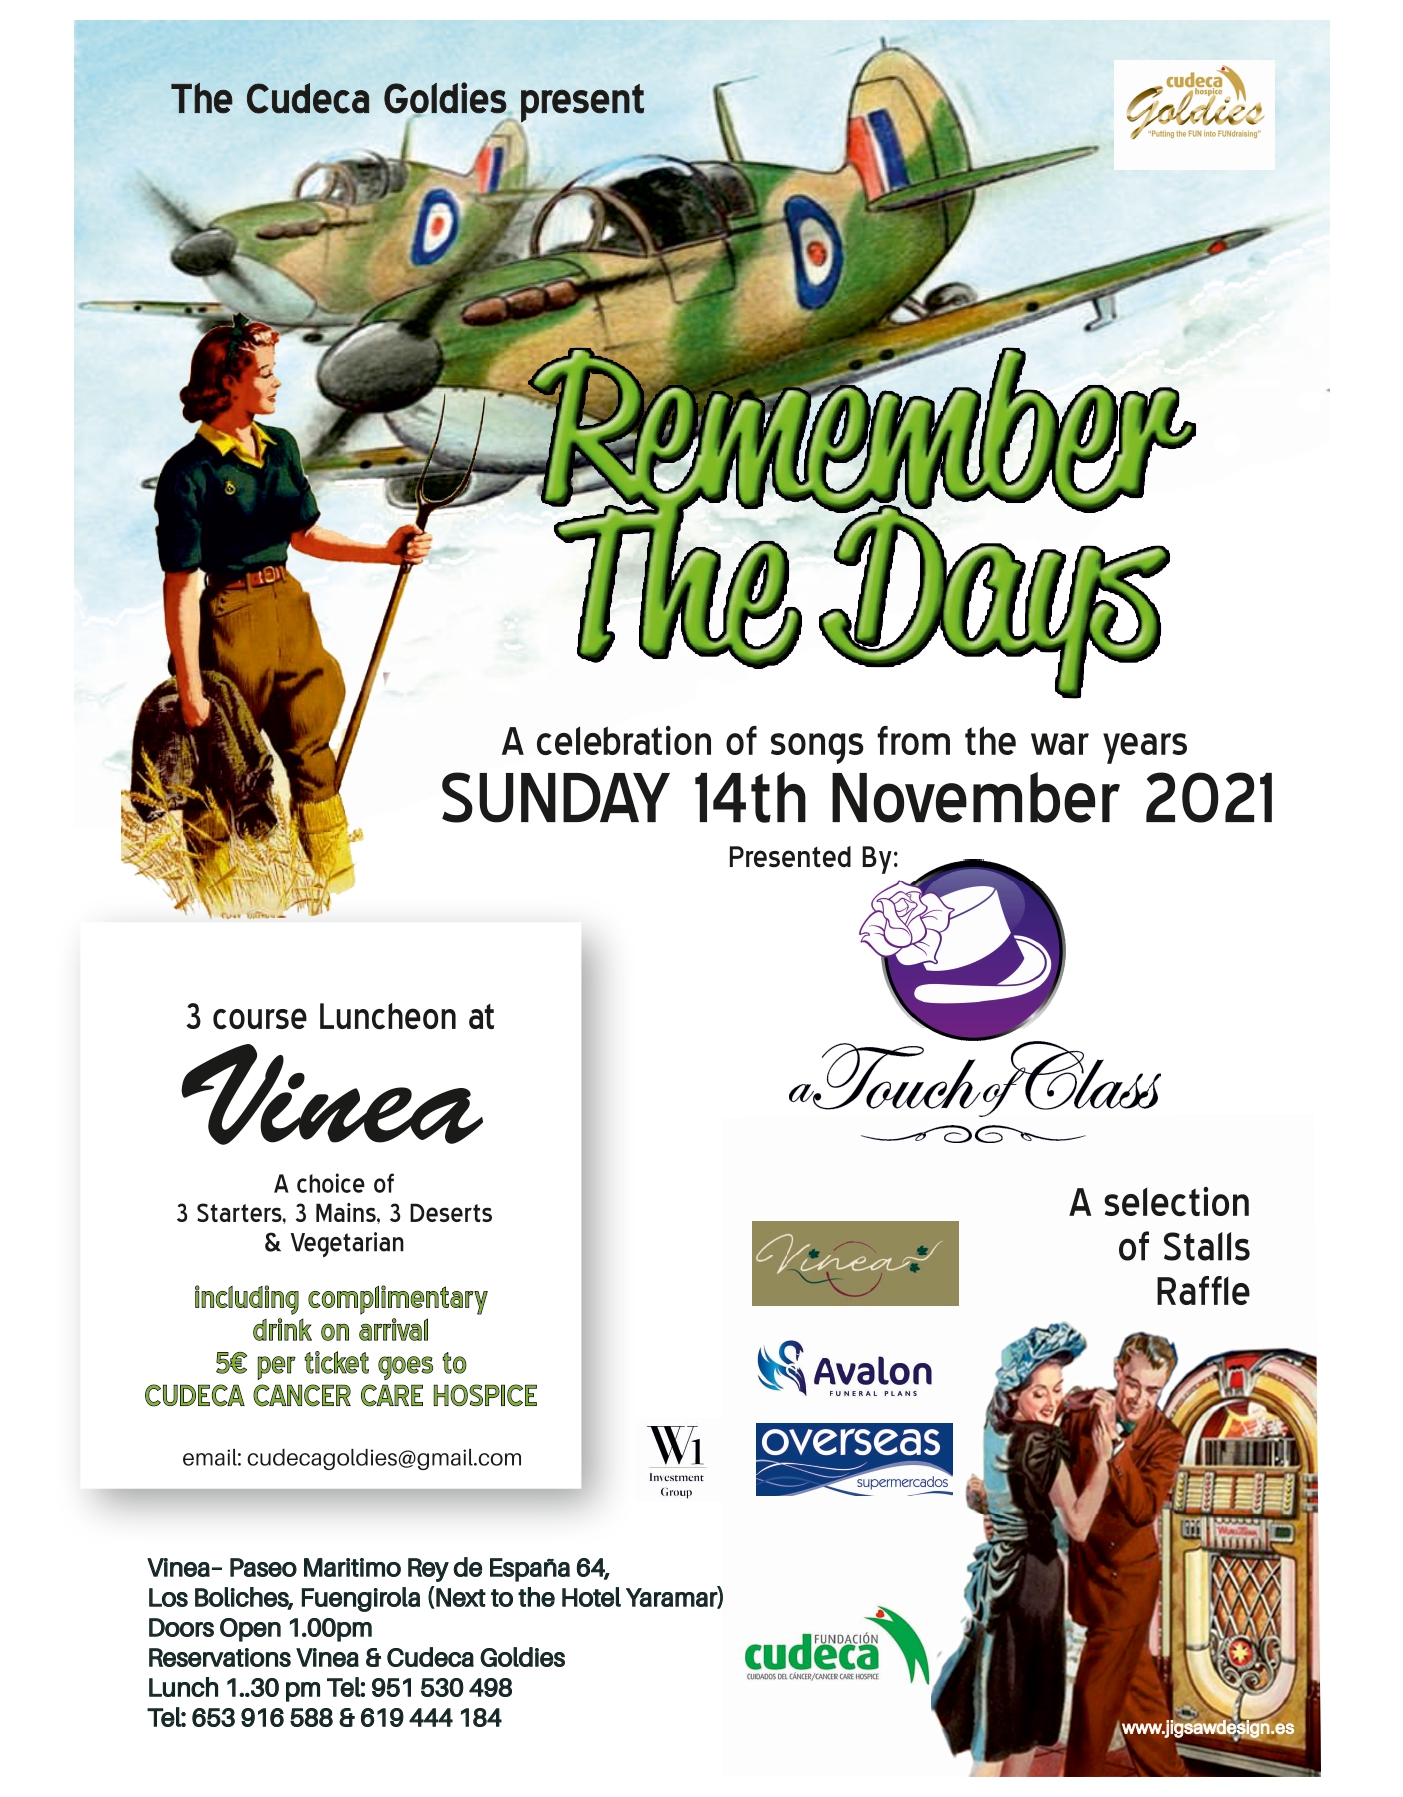 Cudeca Goldies present  “Remember the Days”, a celebration of songs from the war years for Cudeca